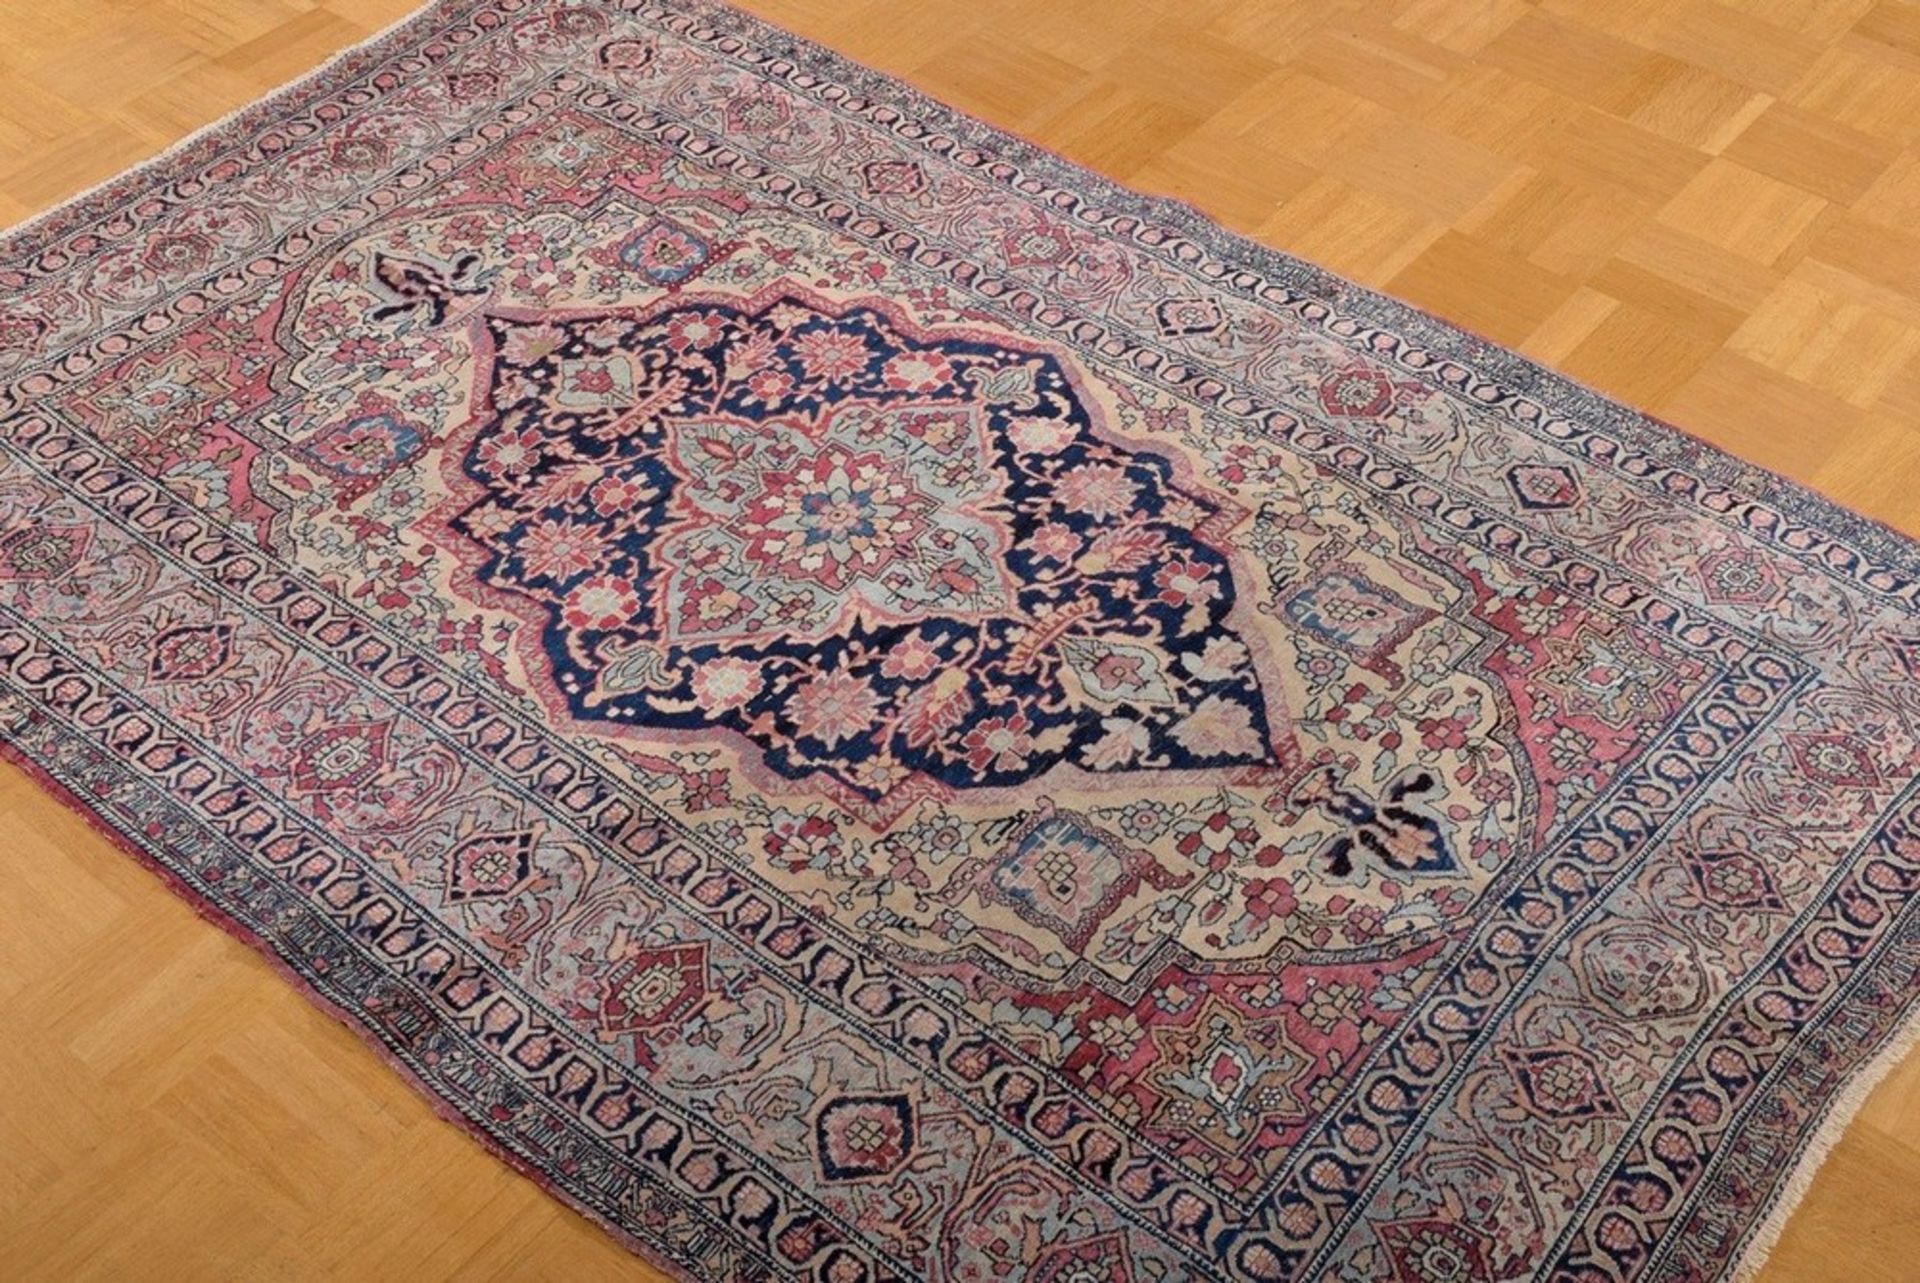 A very finely woven carpet from Tehran, with a densely closed velvet-like pile in pastel colours, d - Image 2 of 7